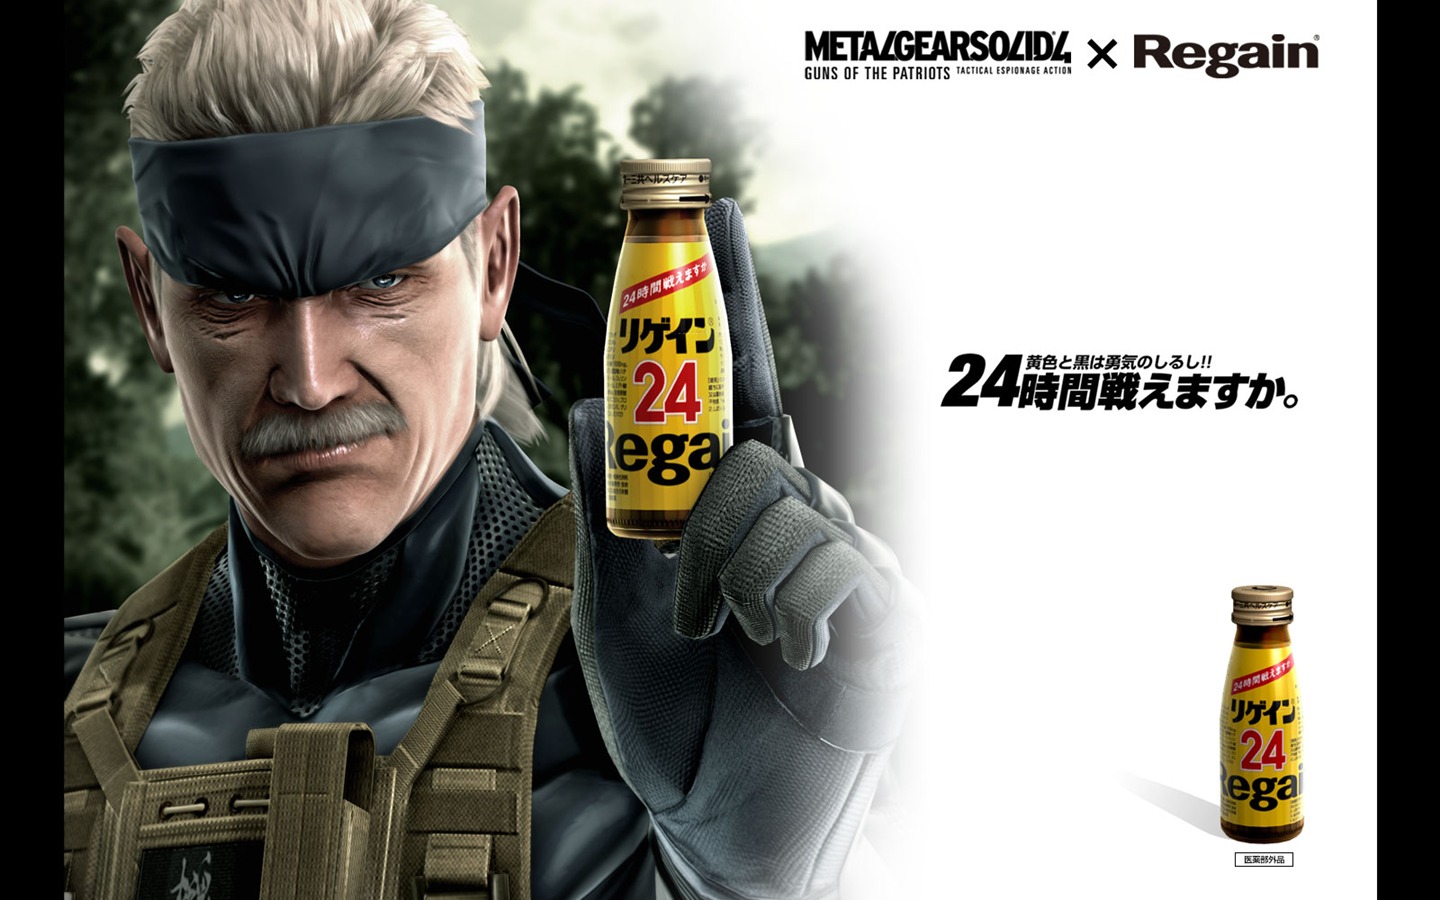 Metal Gear Solid 4: Guns of the Patriots wallpapers #16 - 1440x900